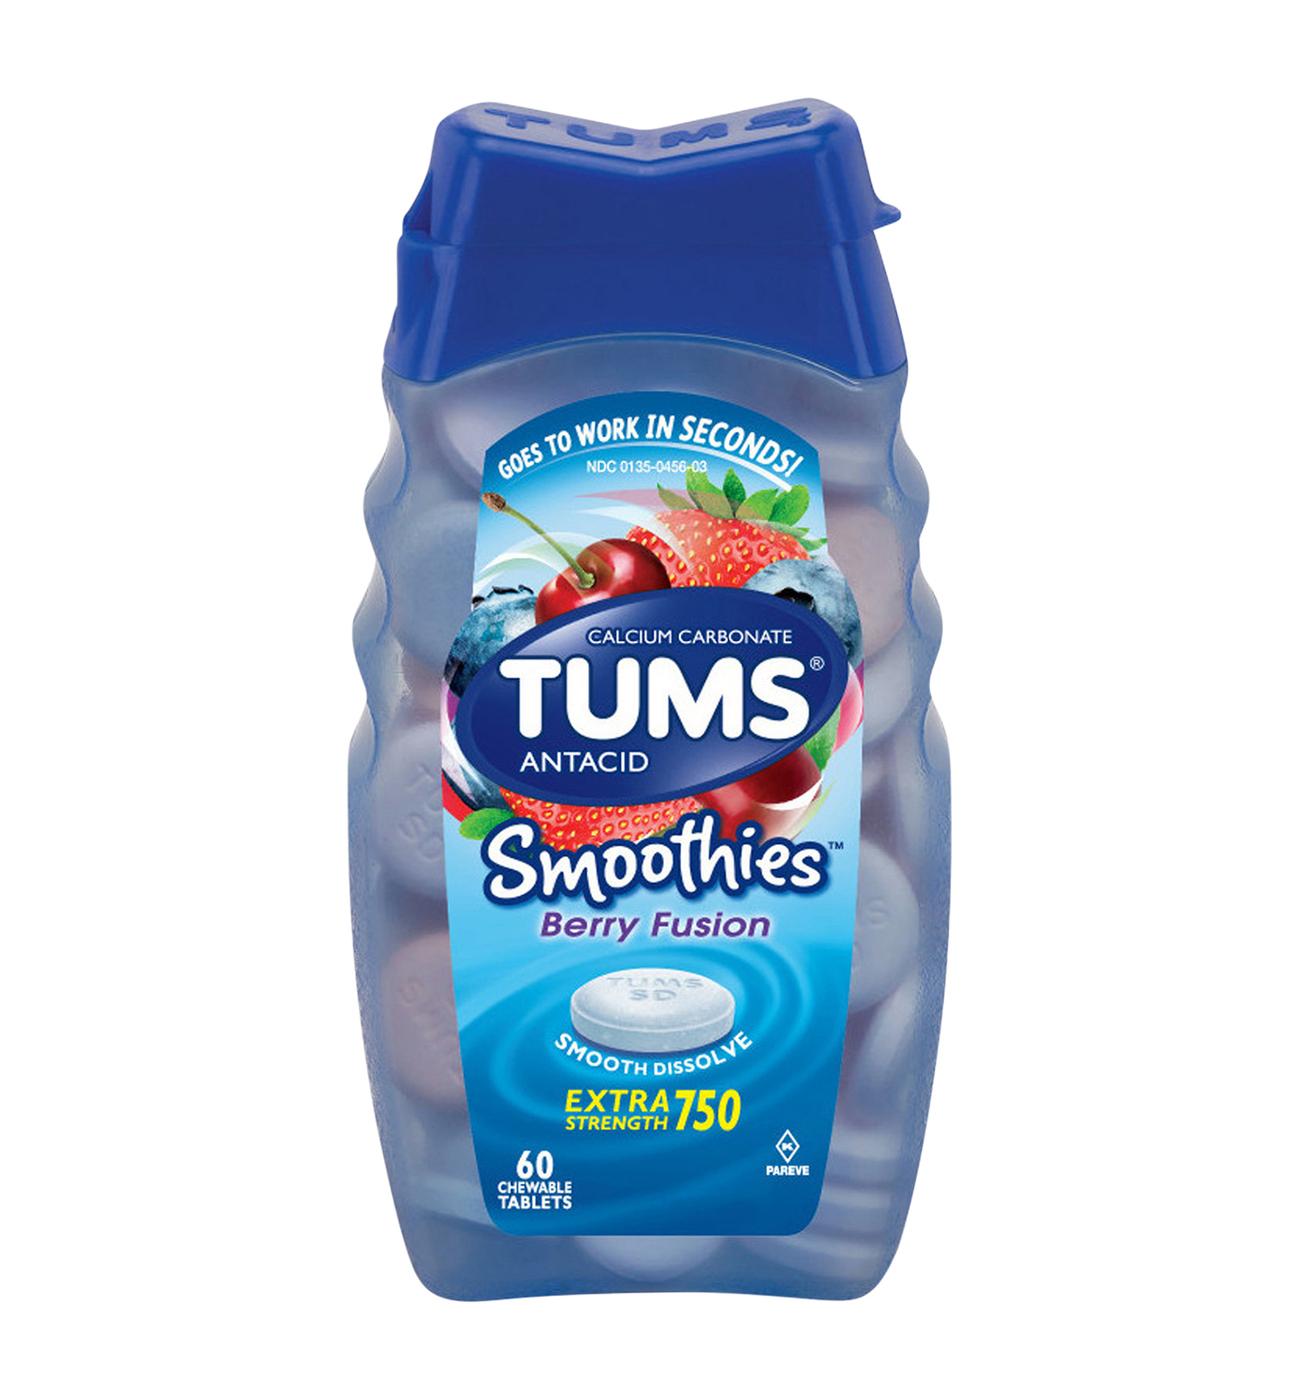 Tums Antacid Smoothies Chewable Tablets - Berry Fusion; image 1 of 8